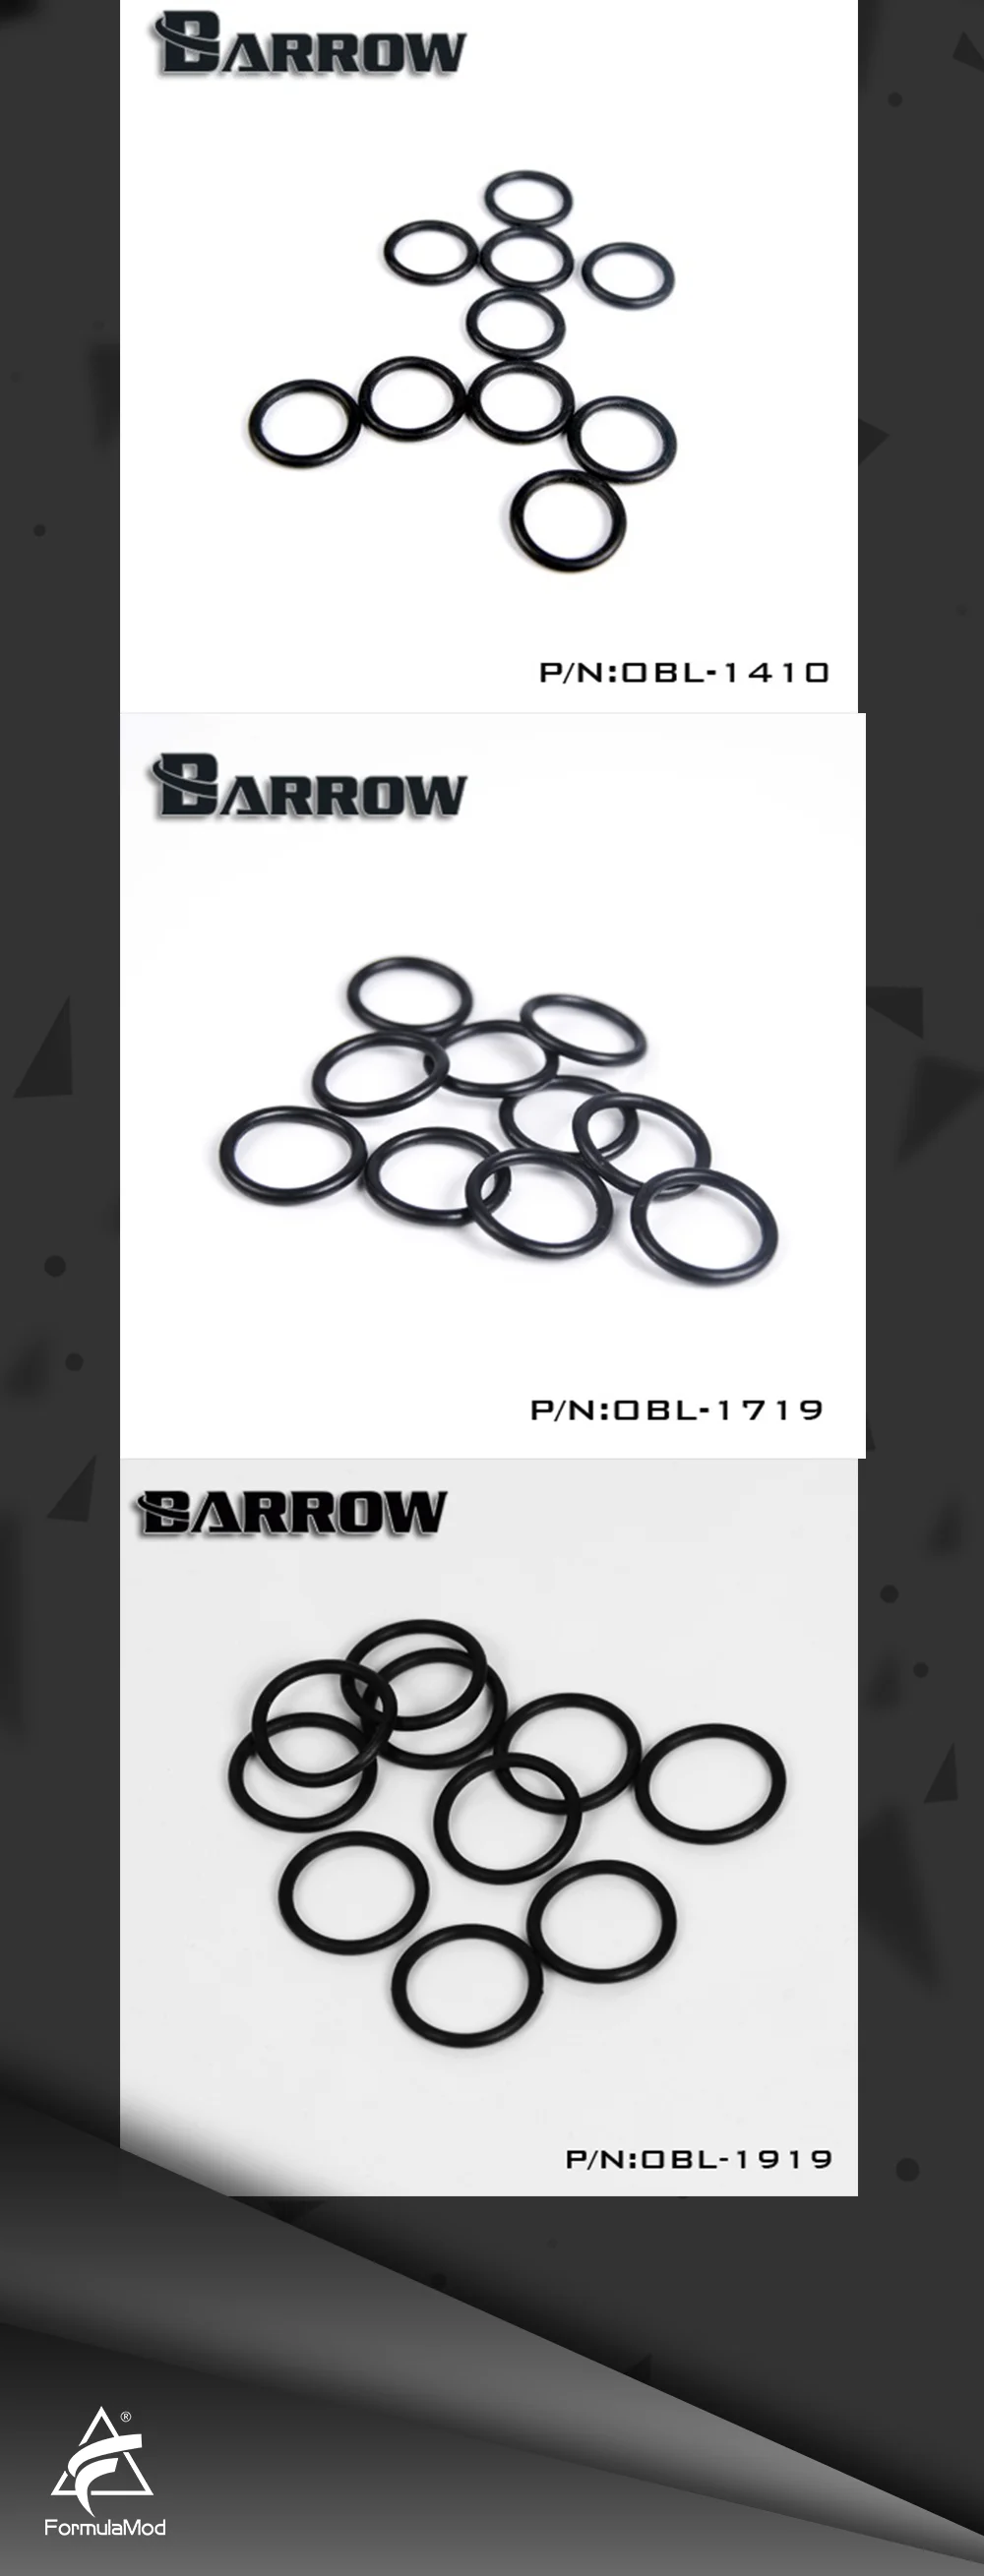 Barrow OBL/OG, Silicone O-rings, For G1/4 Interface, For OD14/16mm Fittings, Water Cooling Practical Accessories  